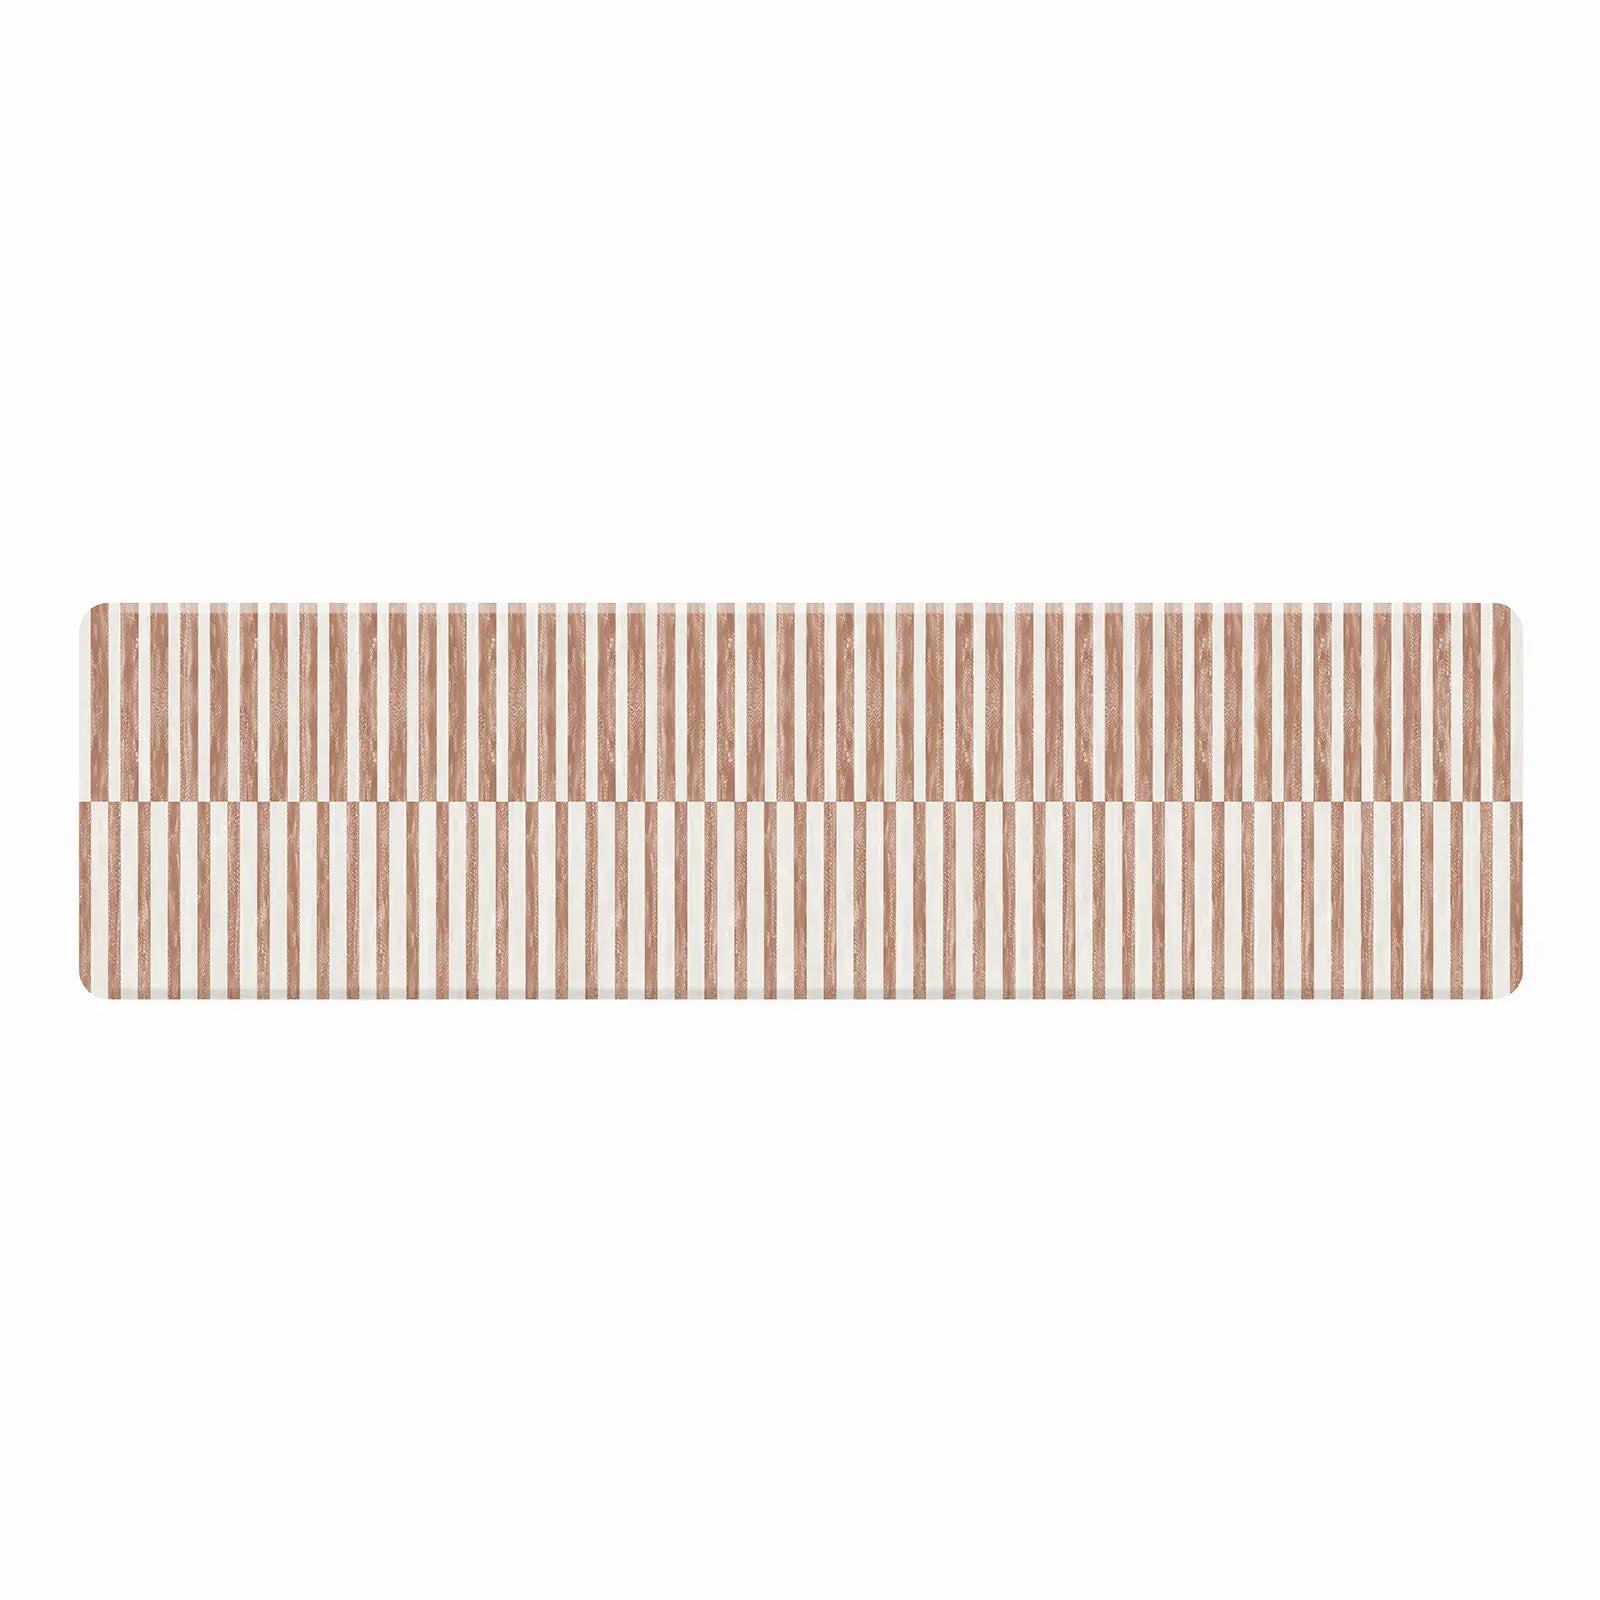 Reese terracotta brown and white inverted stripe standing mat shown in size 30x108